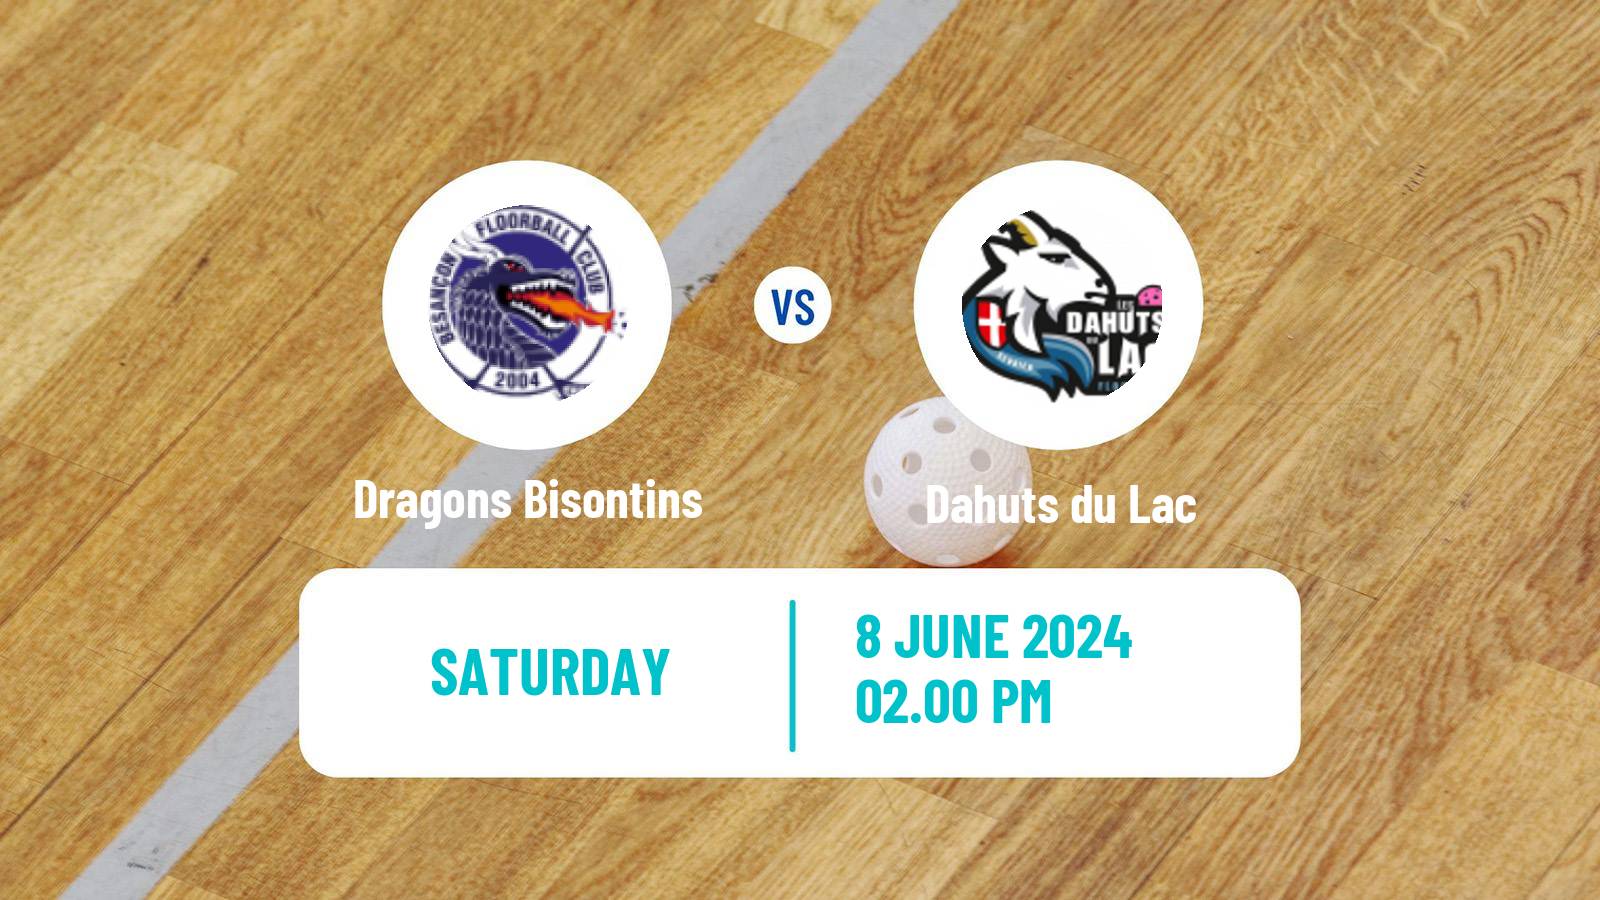 Floorball French Division 1 Floorball Dragons Bisontins - Dahuts du Lac